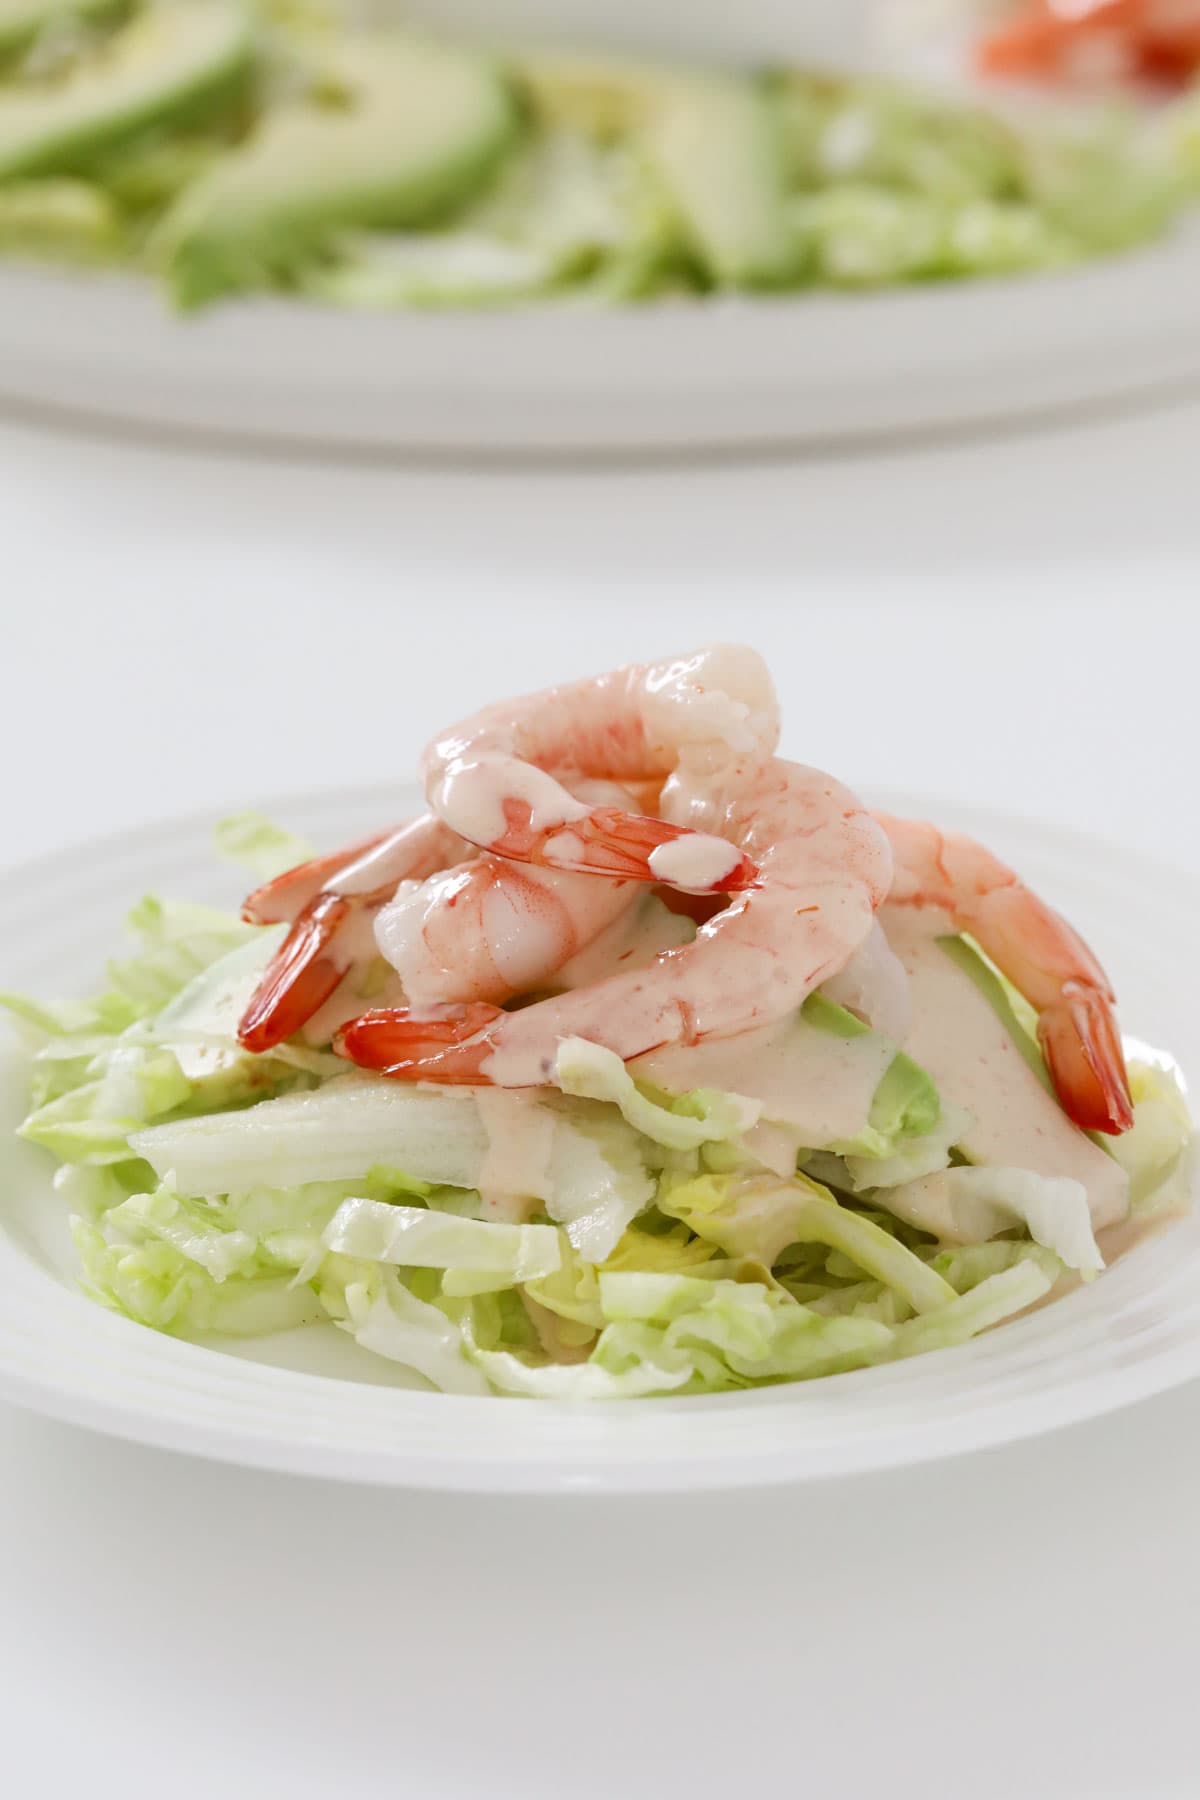 A small plate with a serving of prawn cocktail salad, the ain serving dish just visible behind.